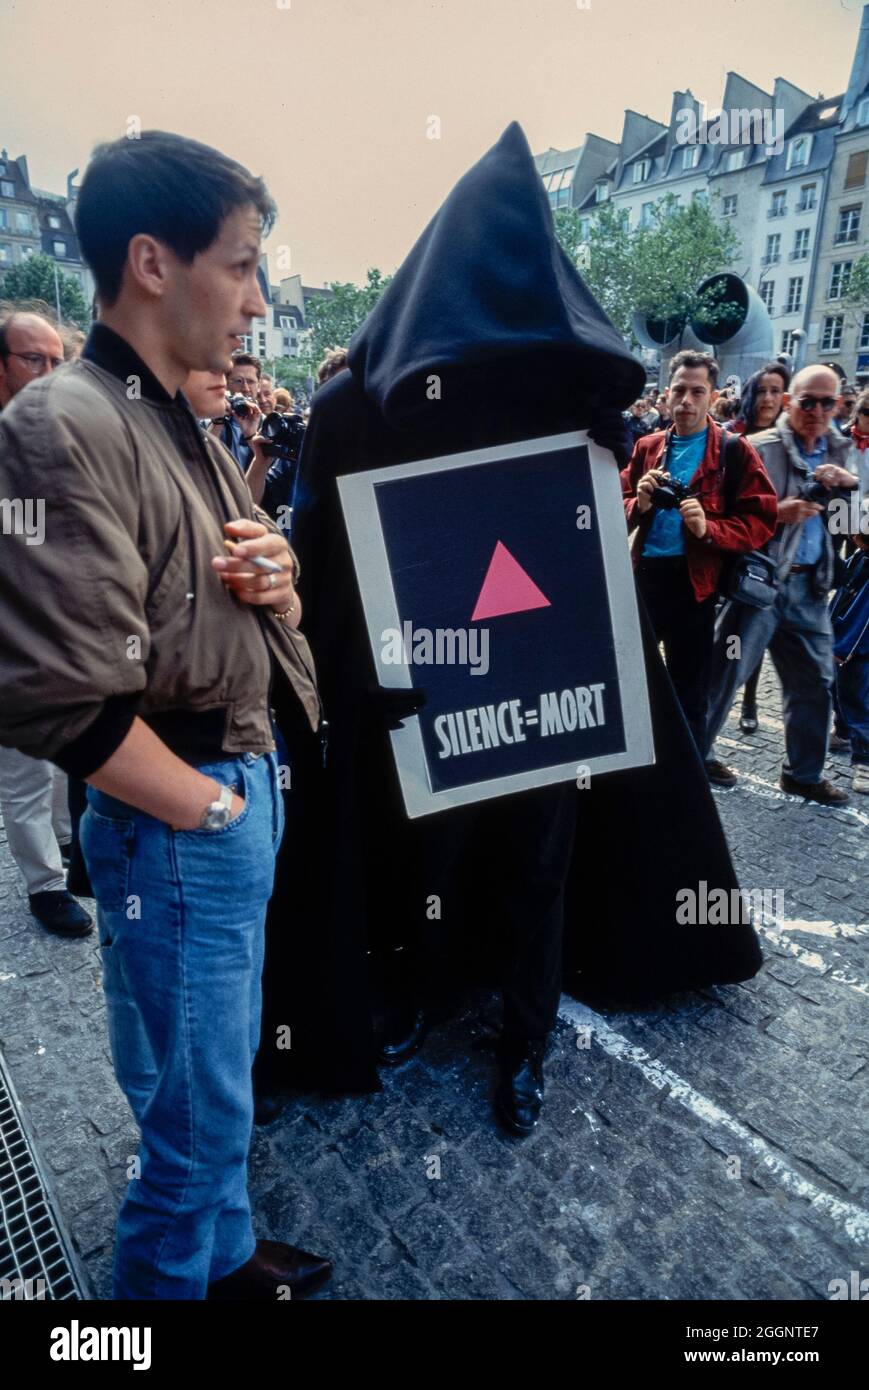 Crowd of People, AIDS Activists of Act Up PAris Demonstrating on Street,  1994, aids 1990s Archives, homosexual holocaust Stock Photo